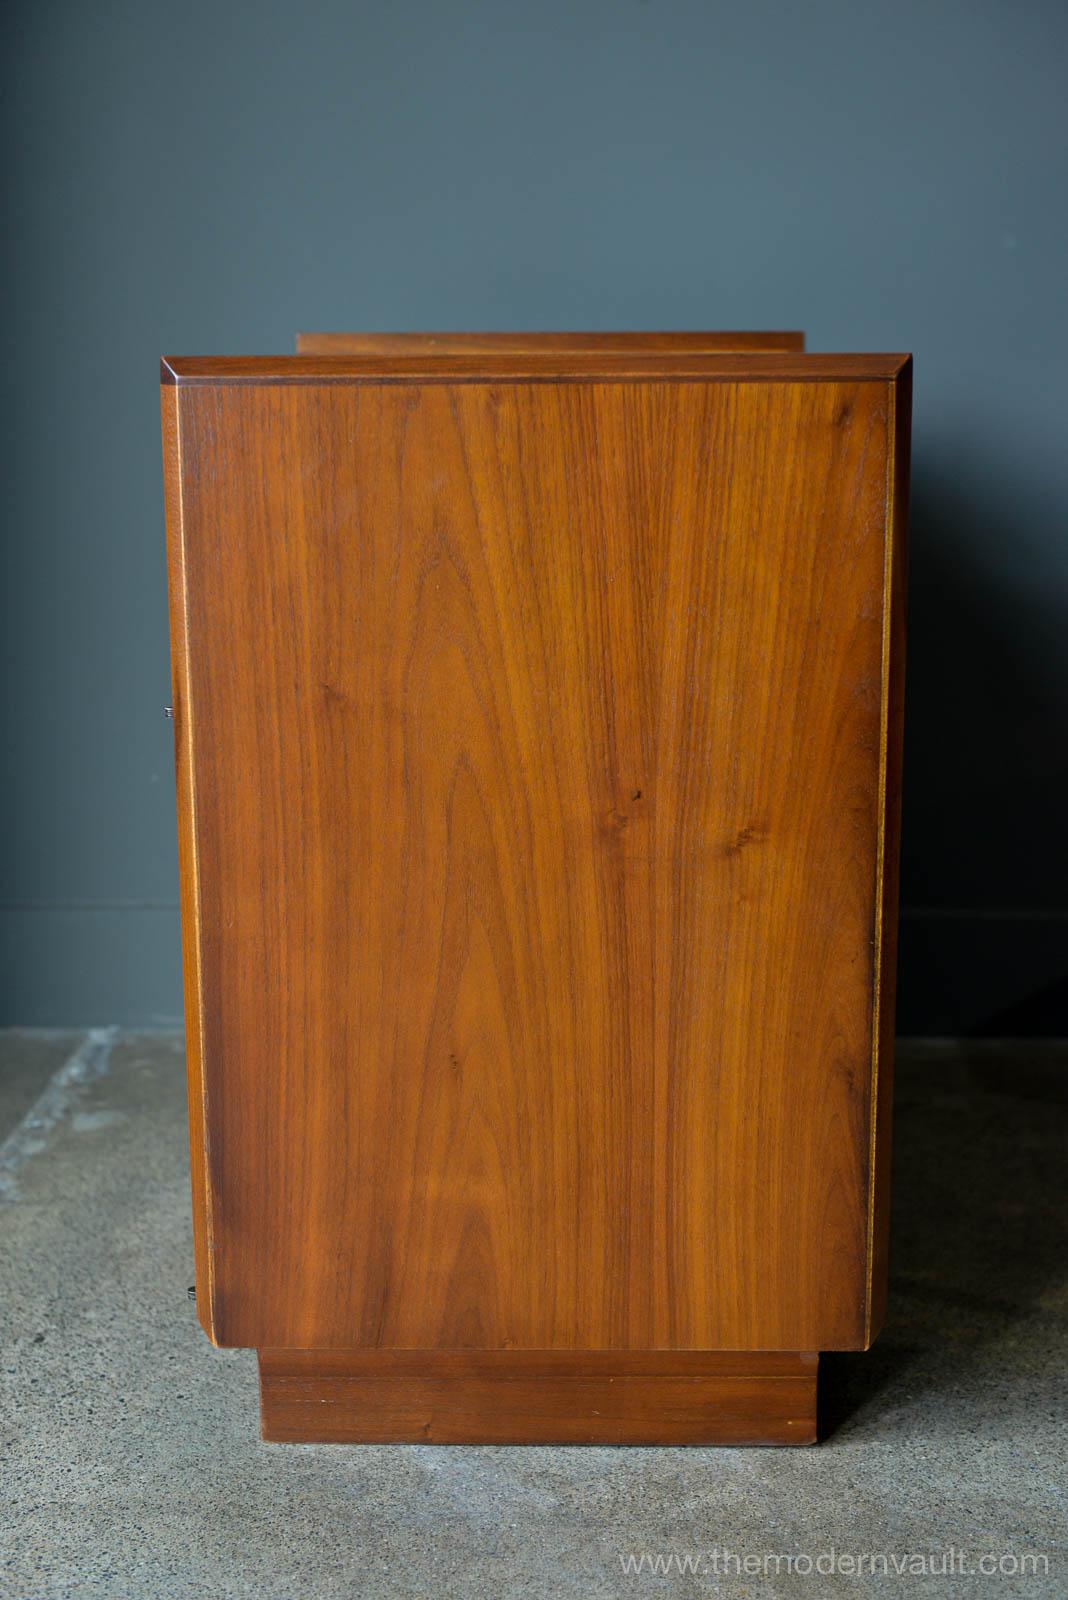 Mid-20th Century Walnut and Cane Cabinet or Nightstand by Jack Cartwright for Founders circa 1965